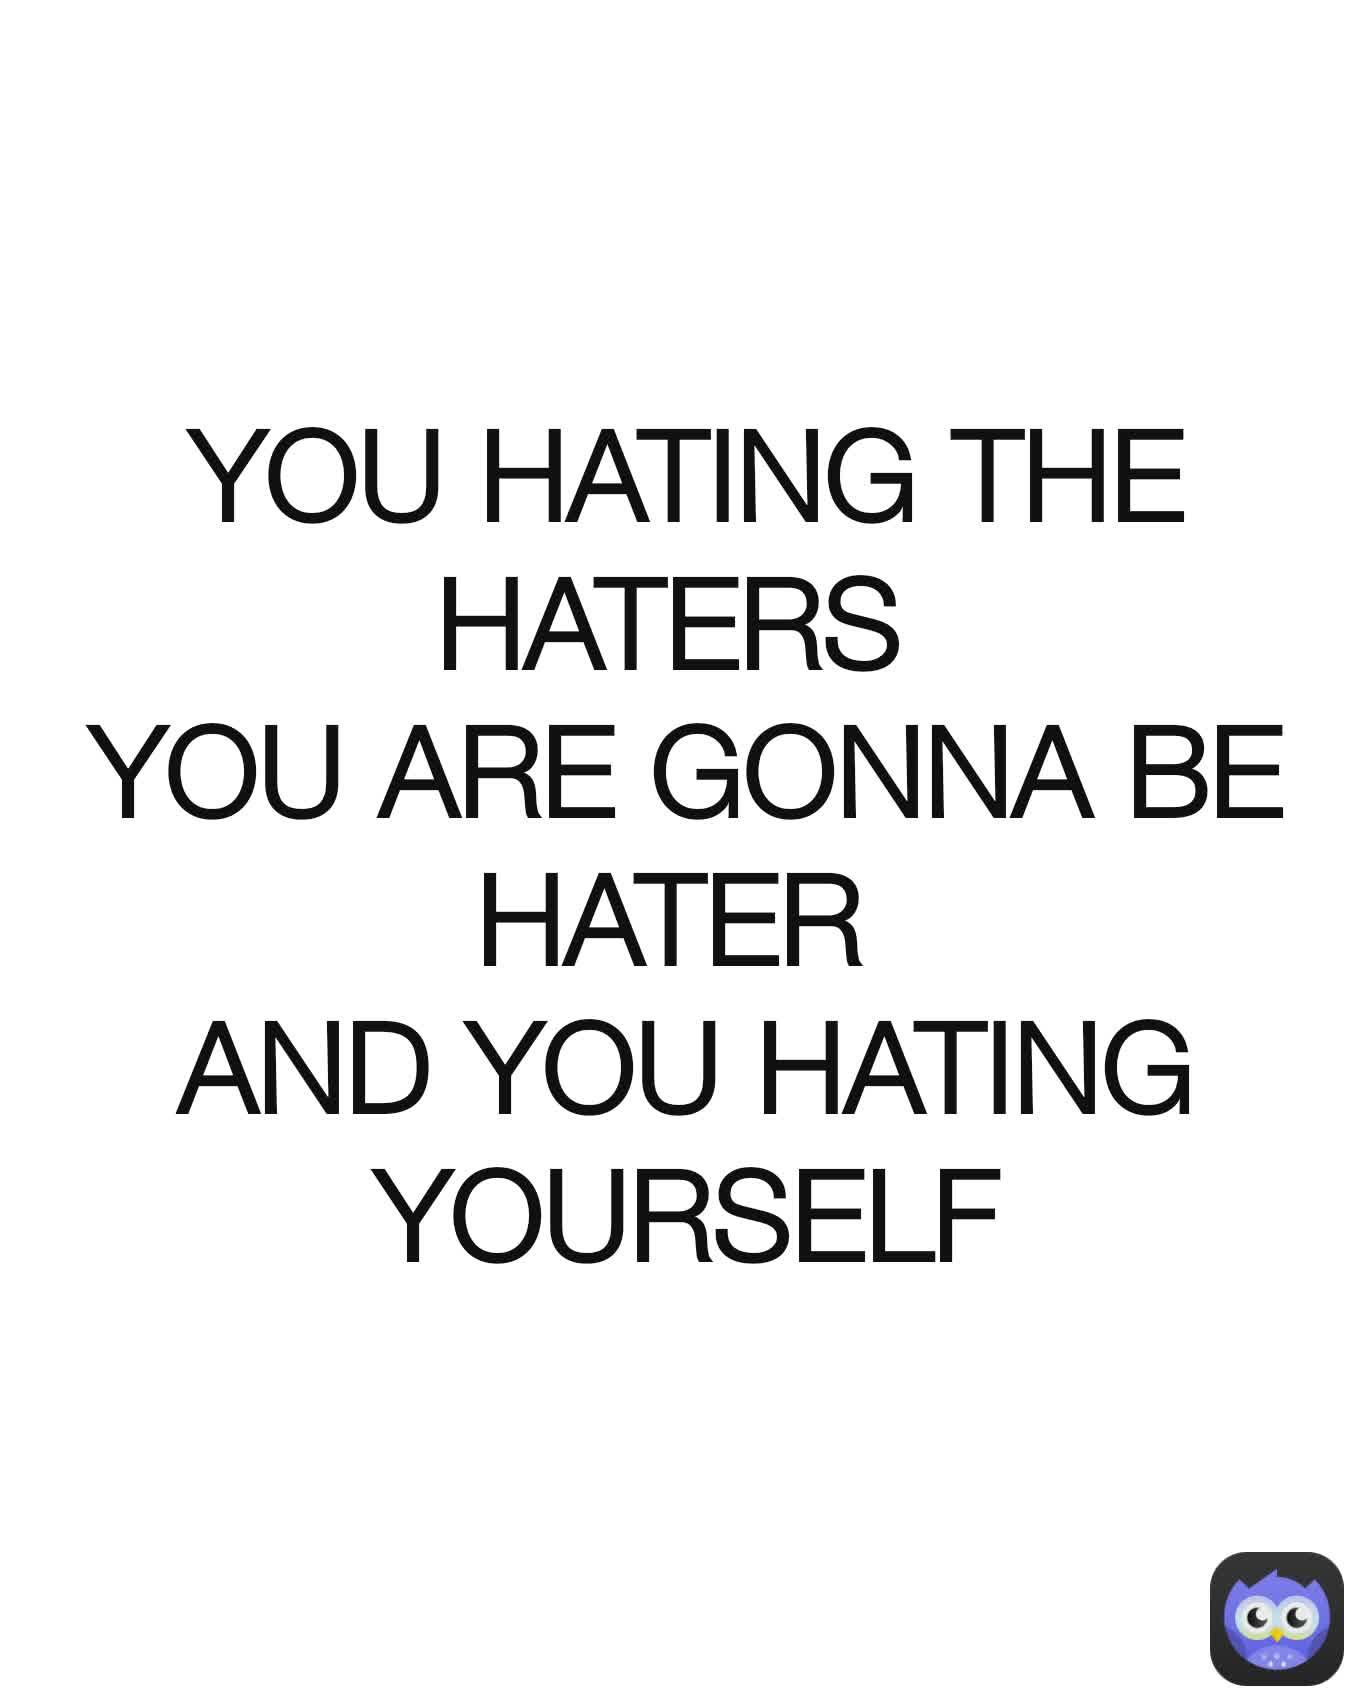 YOU HATING THE HATERS 
YOU ARE GONNA BE HATER 
AND YOU HATING YOURSELF